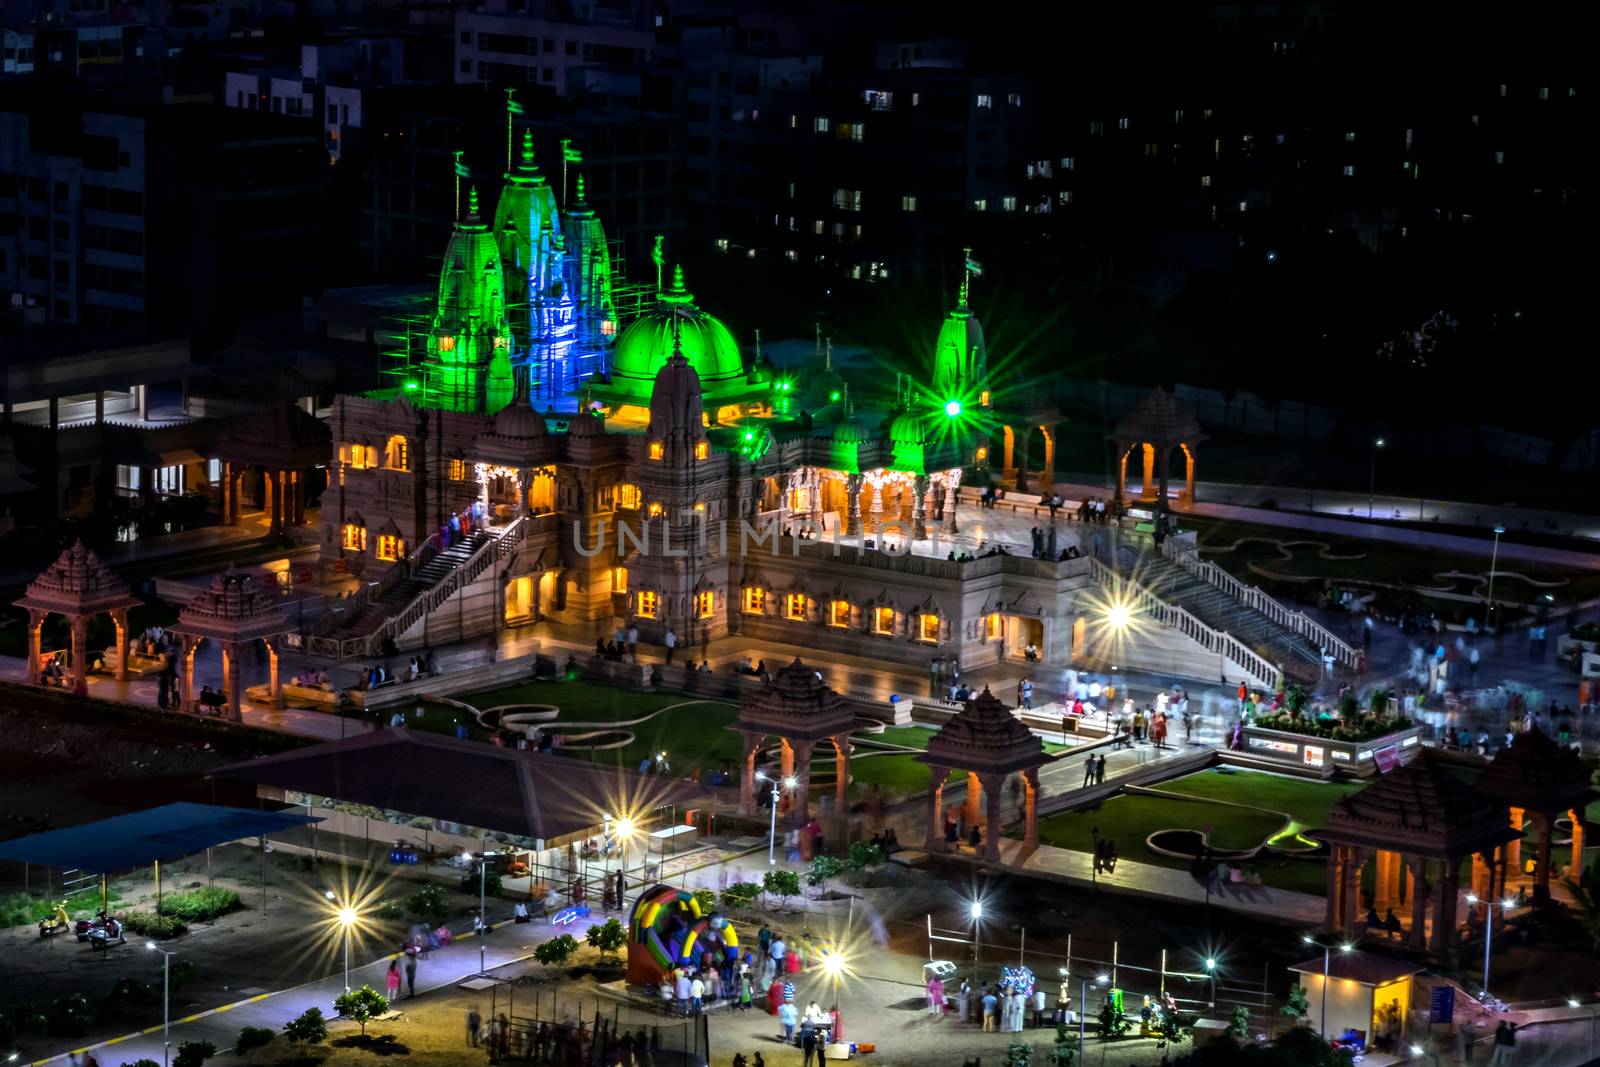 Night time green lighting on Shree Swaminarayan temple at night, Pune, India. by lalam